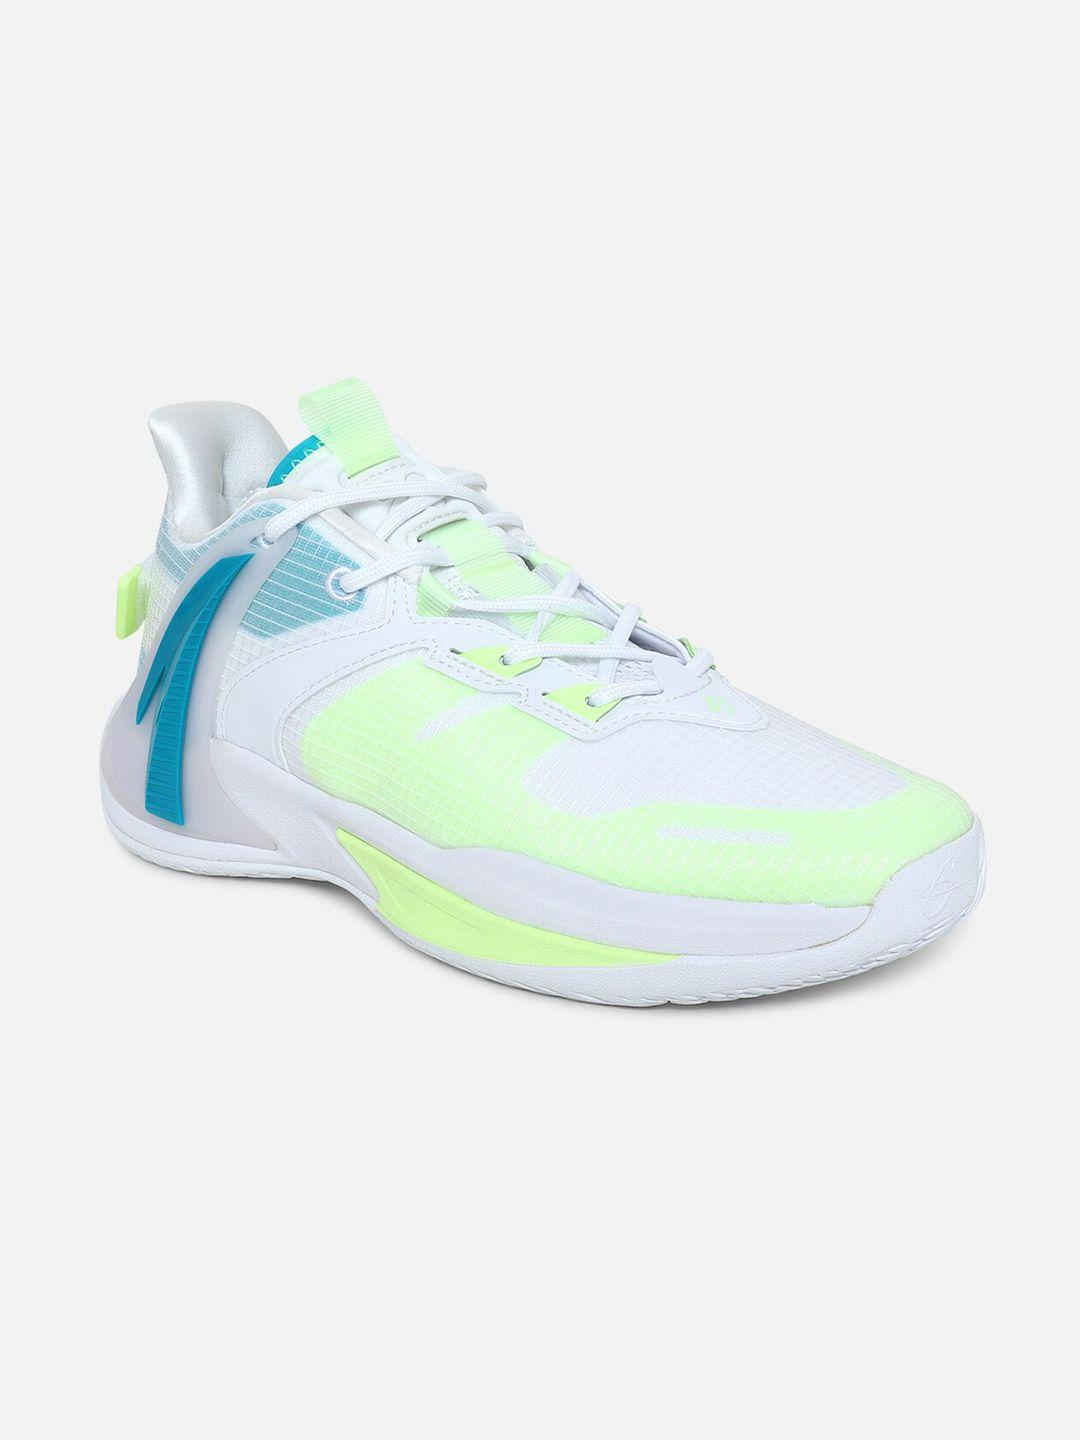 anta men white and fluorescent green mesh walking non-marking lace-up shoes